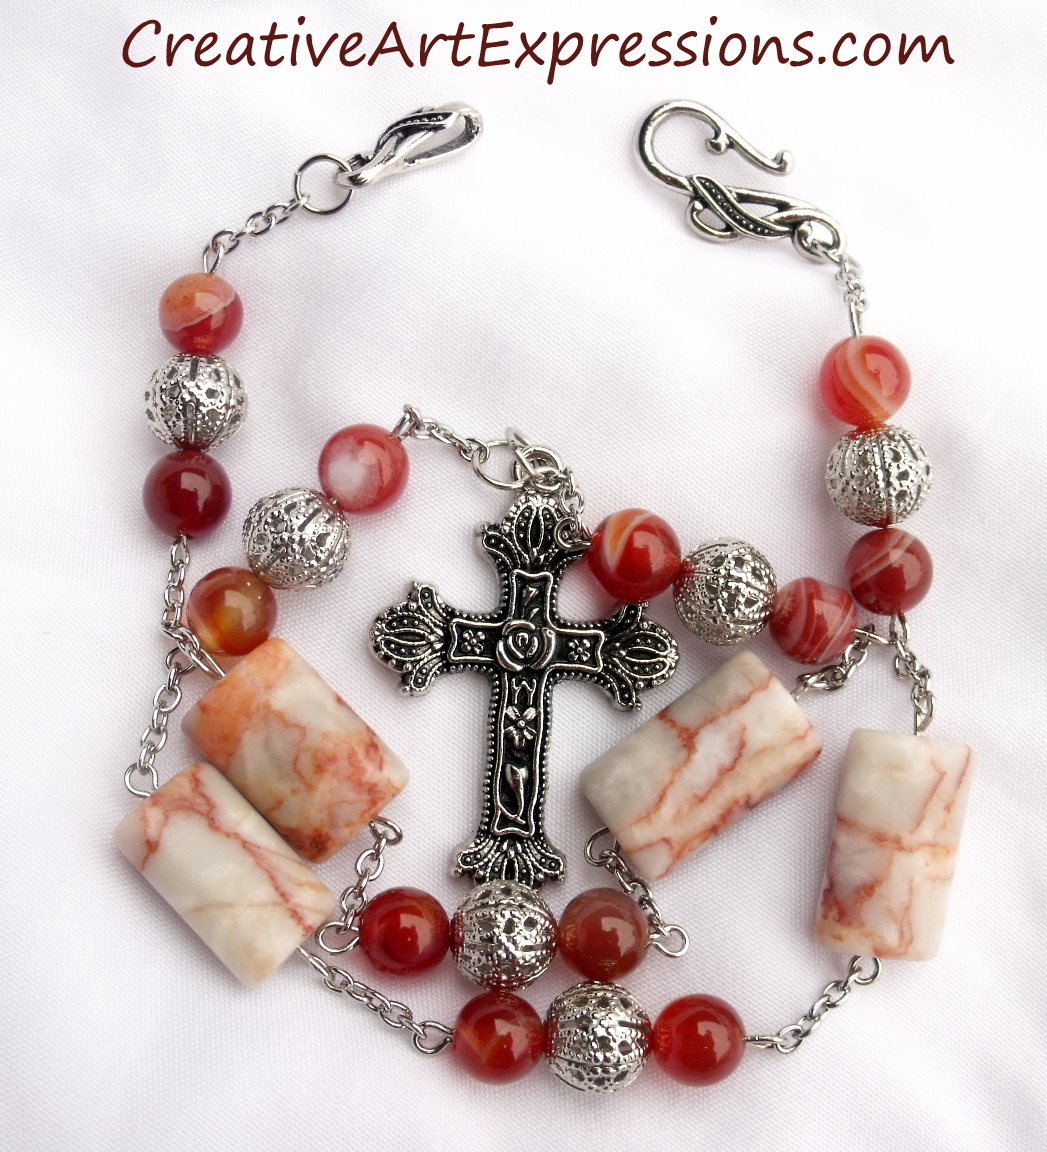 Creative Art Expressions Handmade Red Agate & Marble Prayer Beads Necklace Jewelry Design